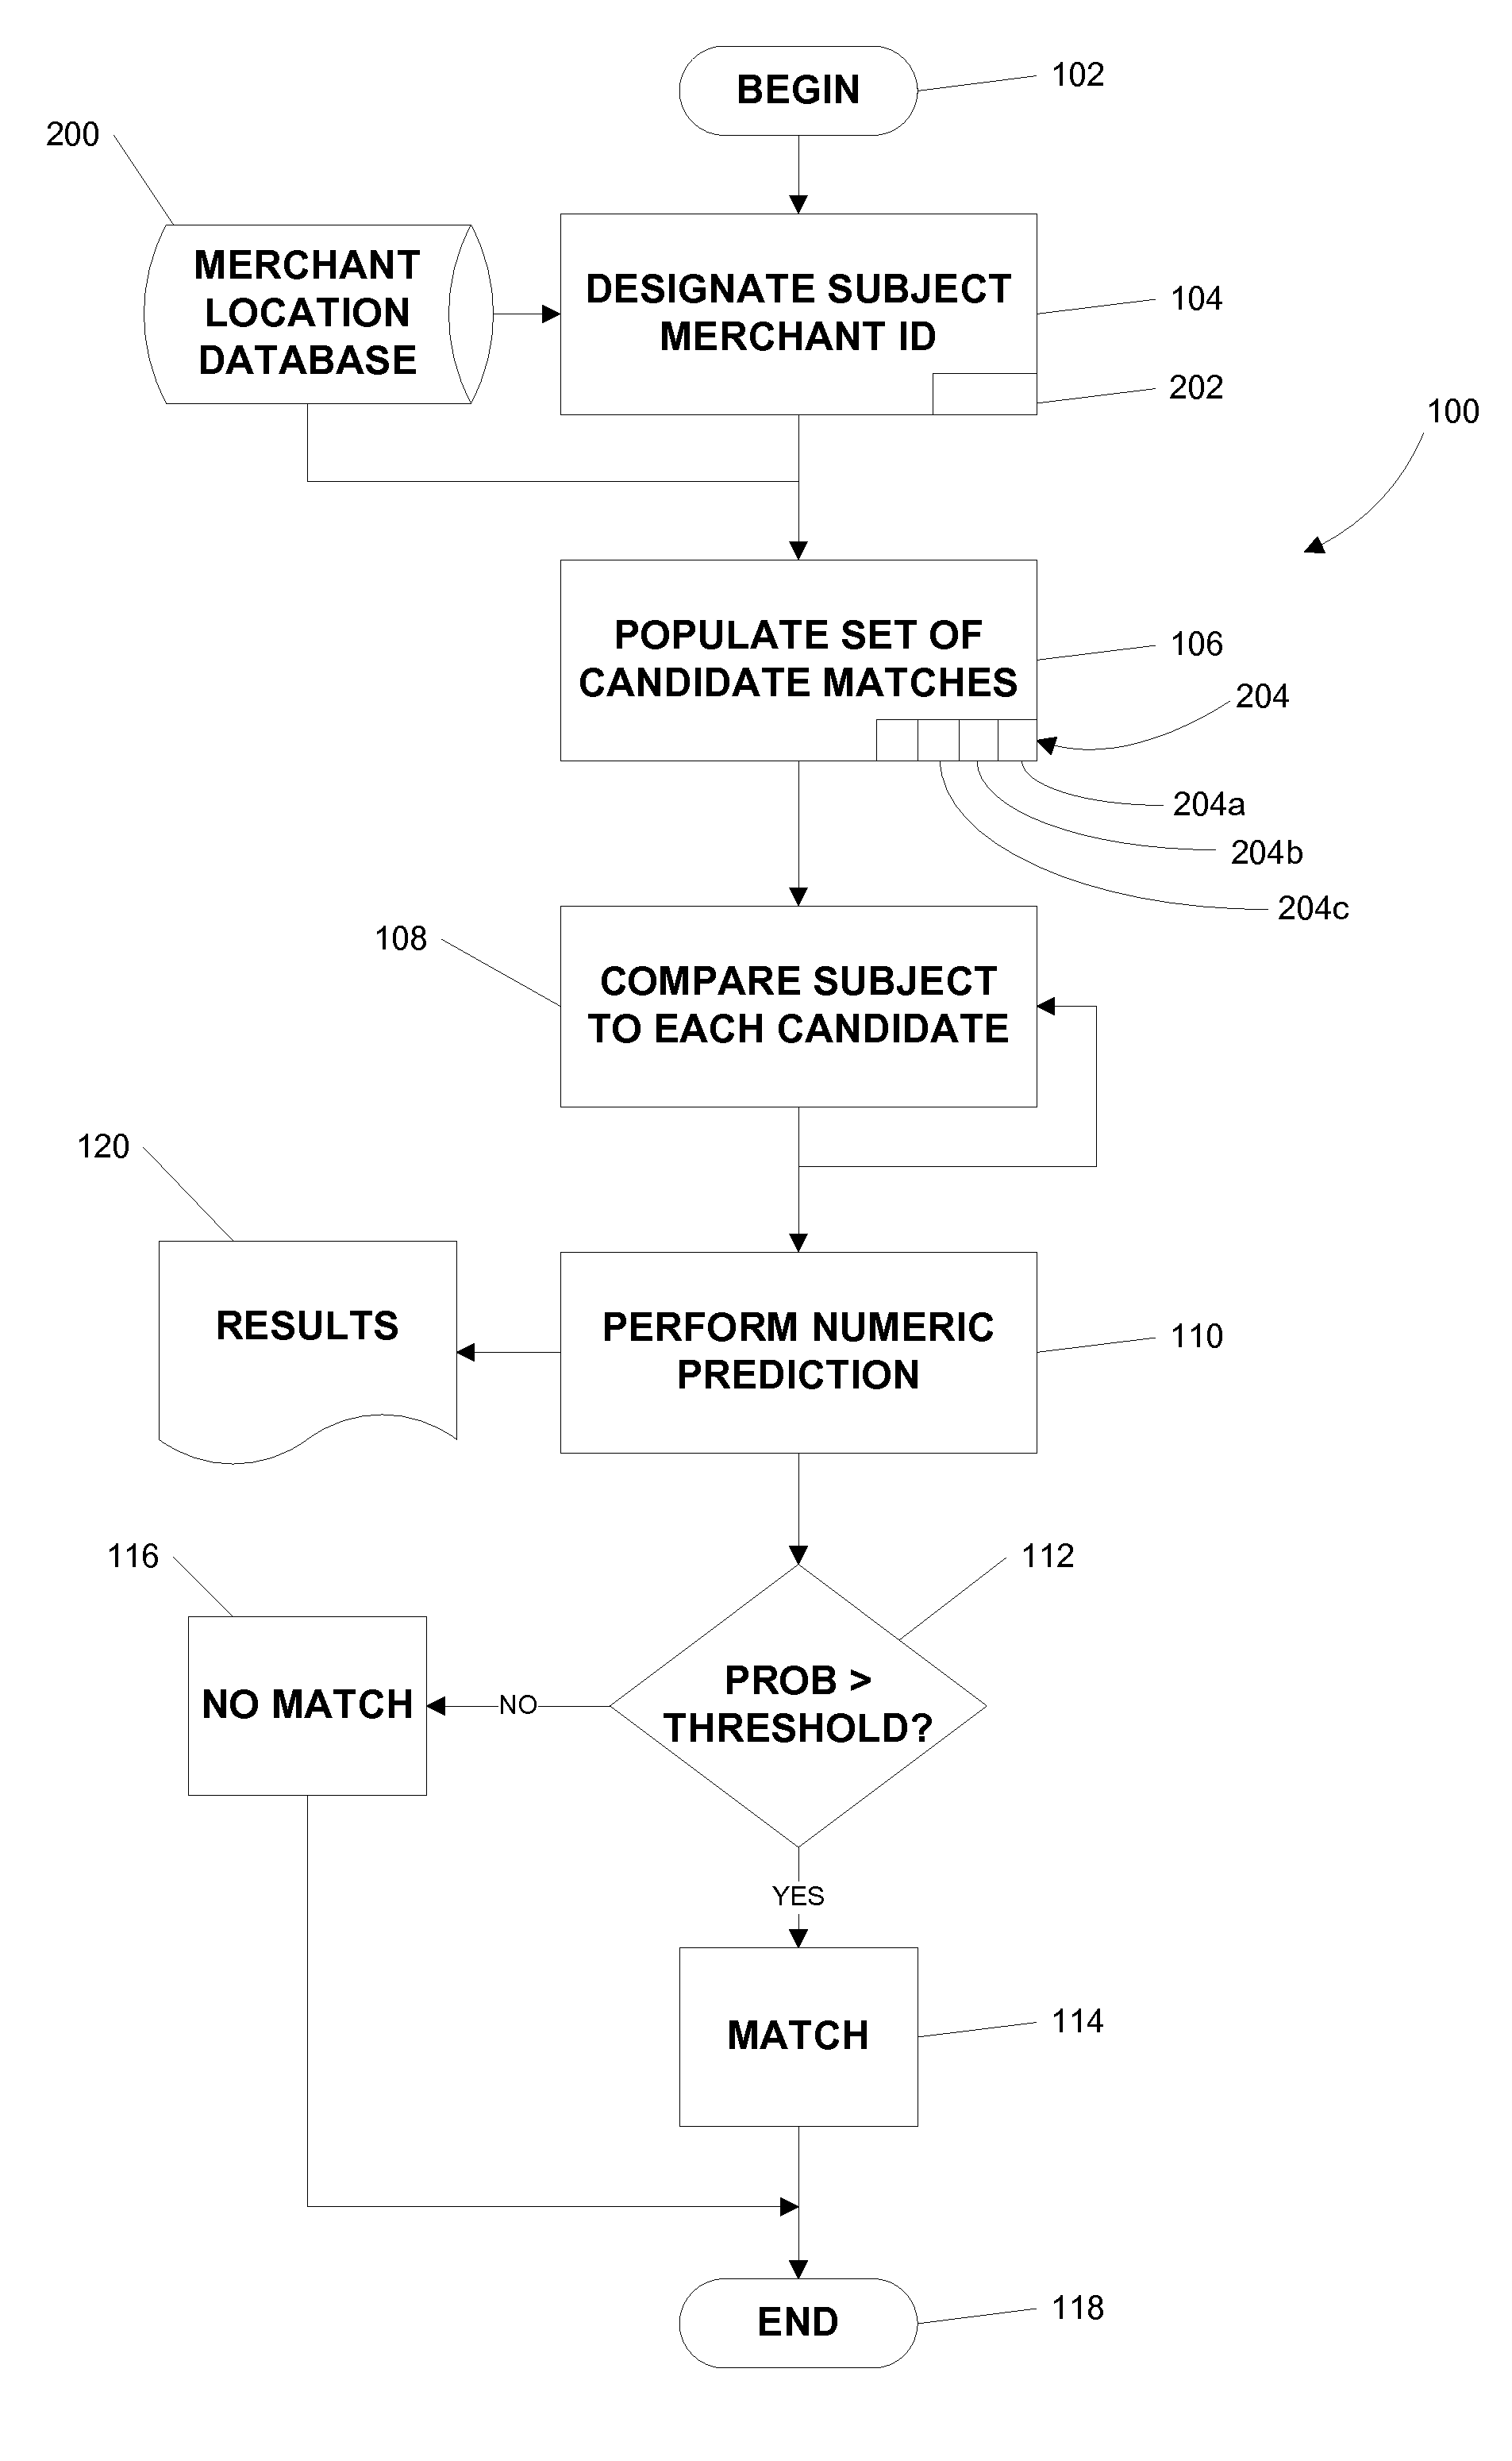 Recognizing and combining redundant merchant deisgnations in a transaction database